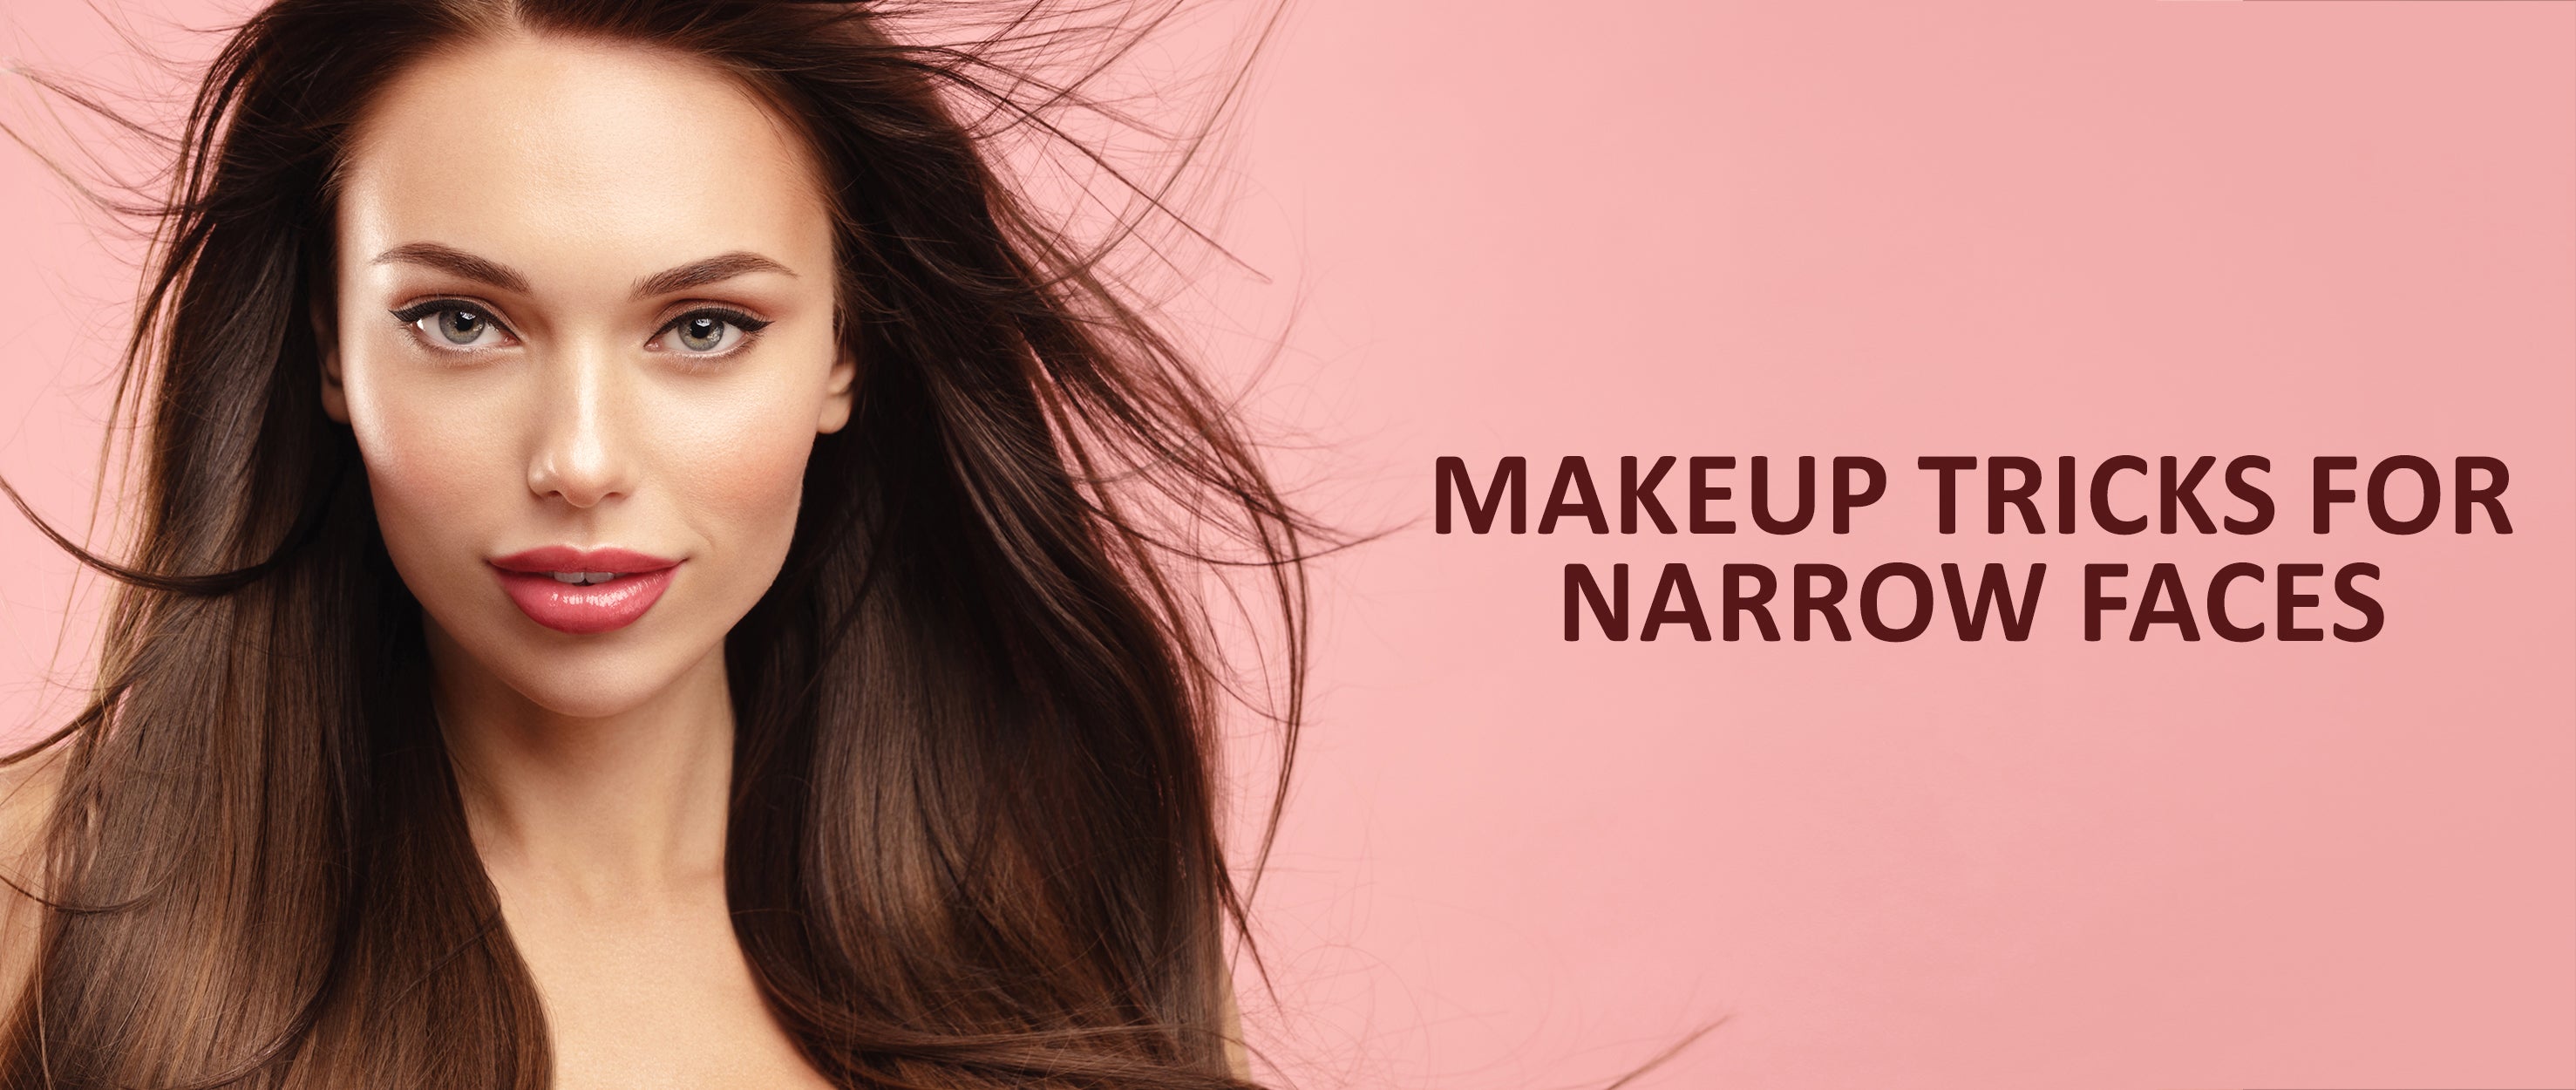 10 Game-Changing Makeup Tricks for Narrow Faces – Faces Canada